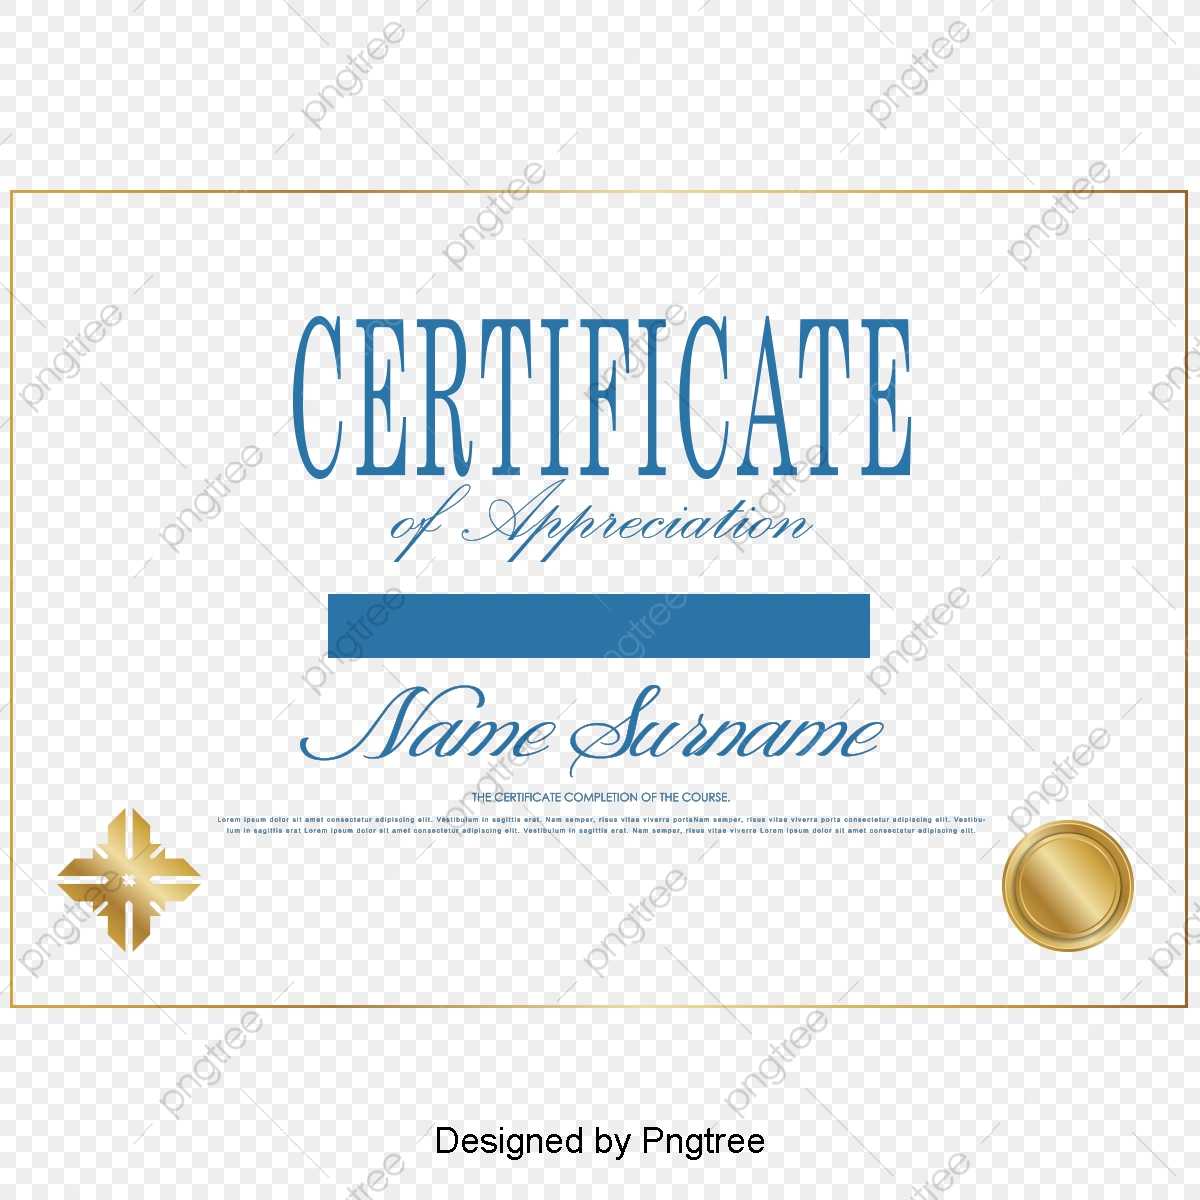 Simple Certificate Certificates Design Vector Material Within Update Certificates That Use Certificate Templates